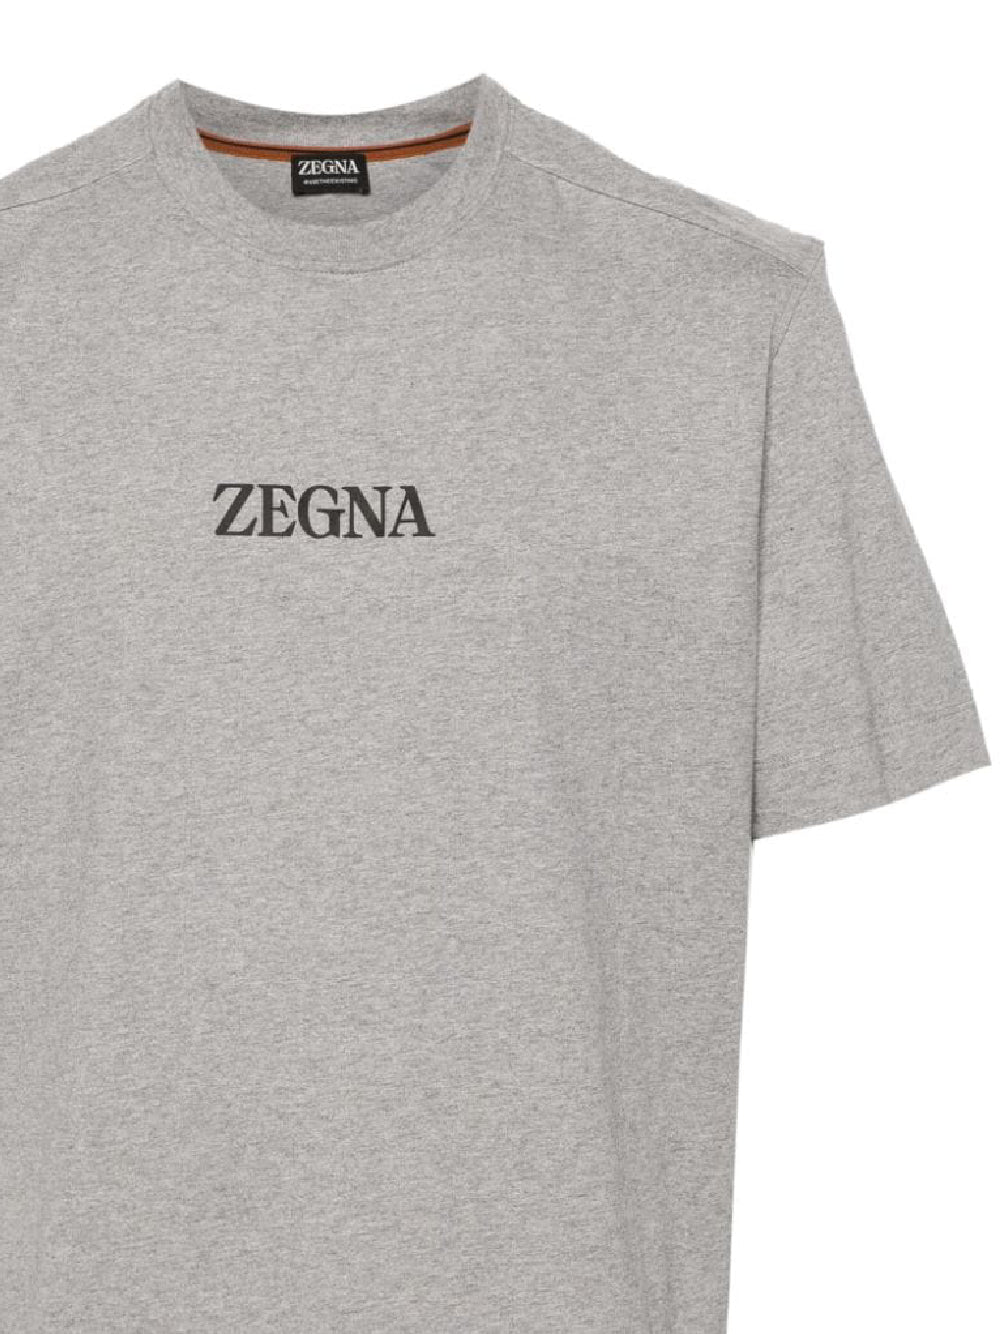 ZEGNA UD364A7-D777 Man Grey T-shirts and Polos - Zuklat